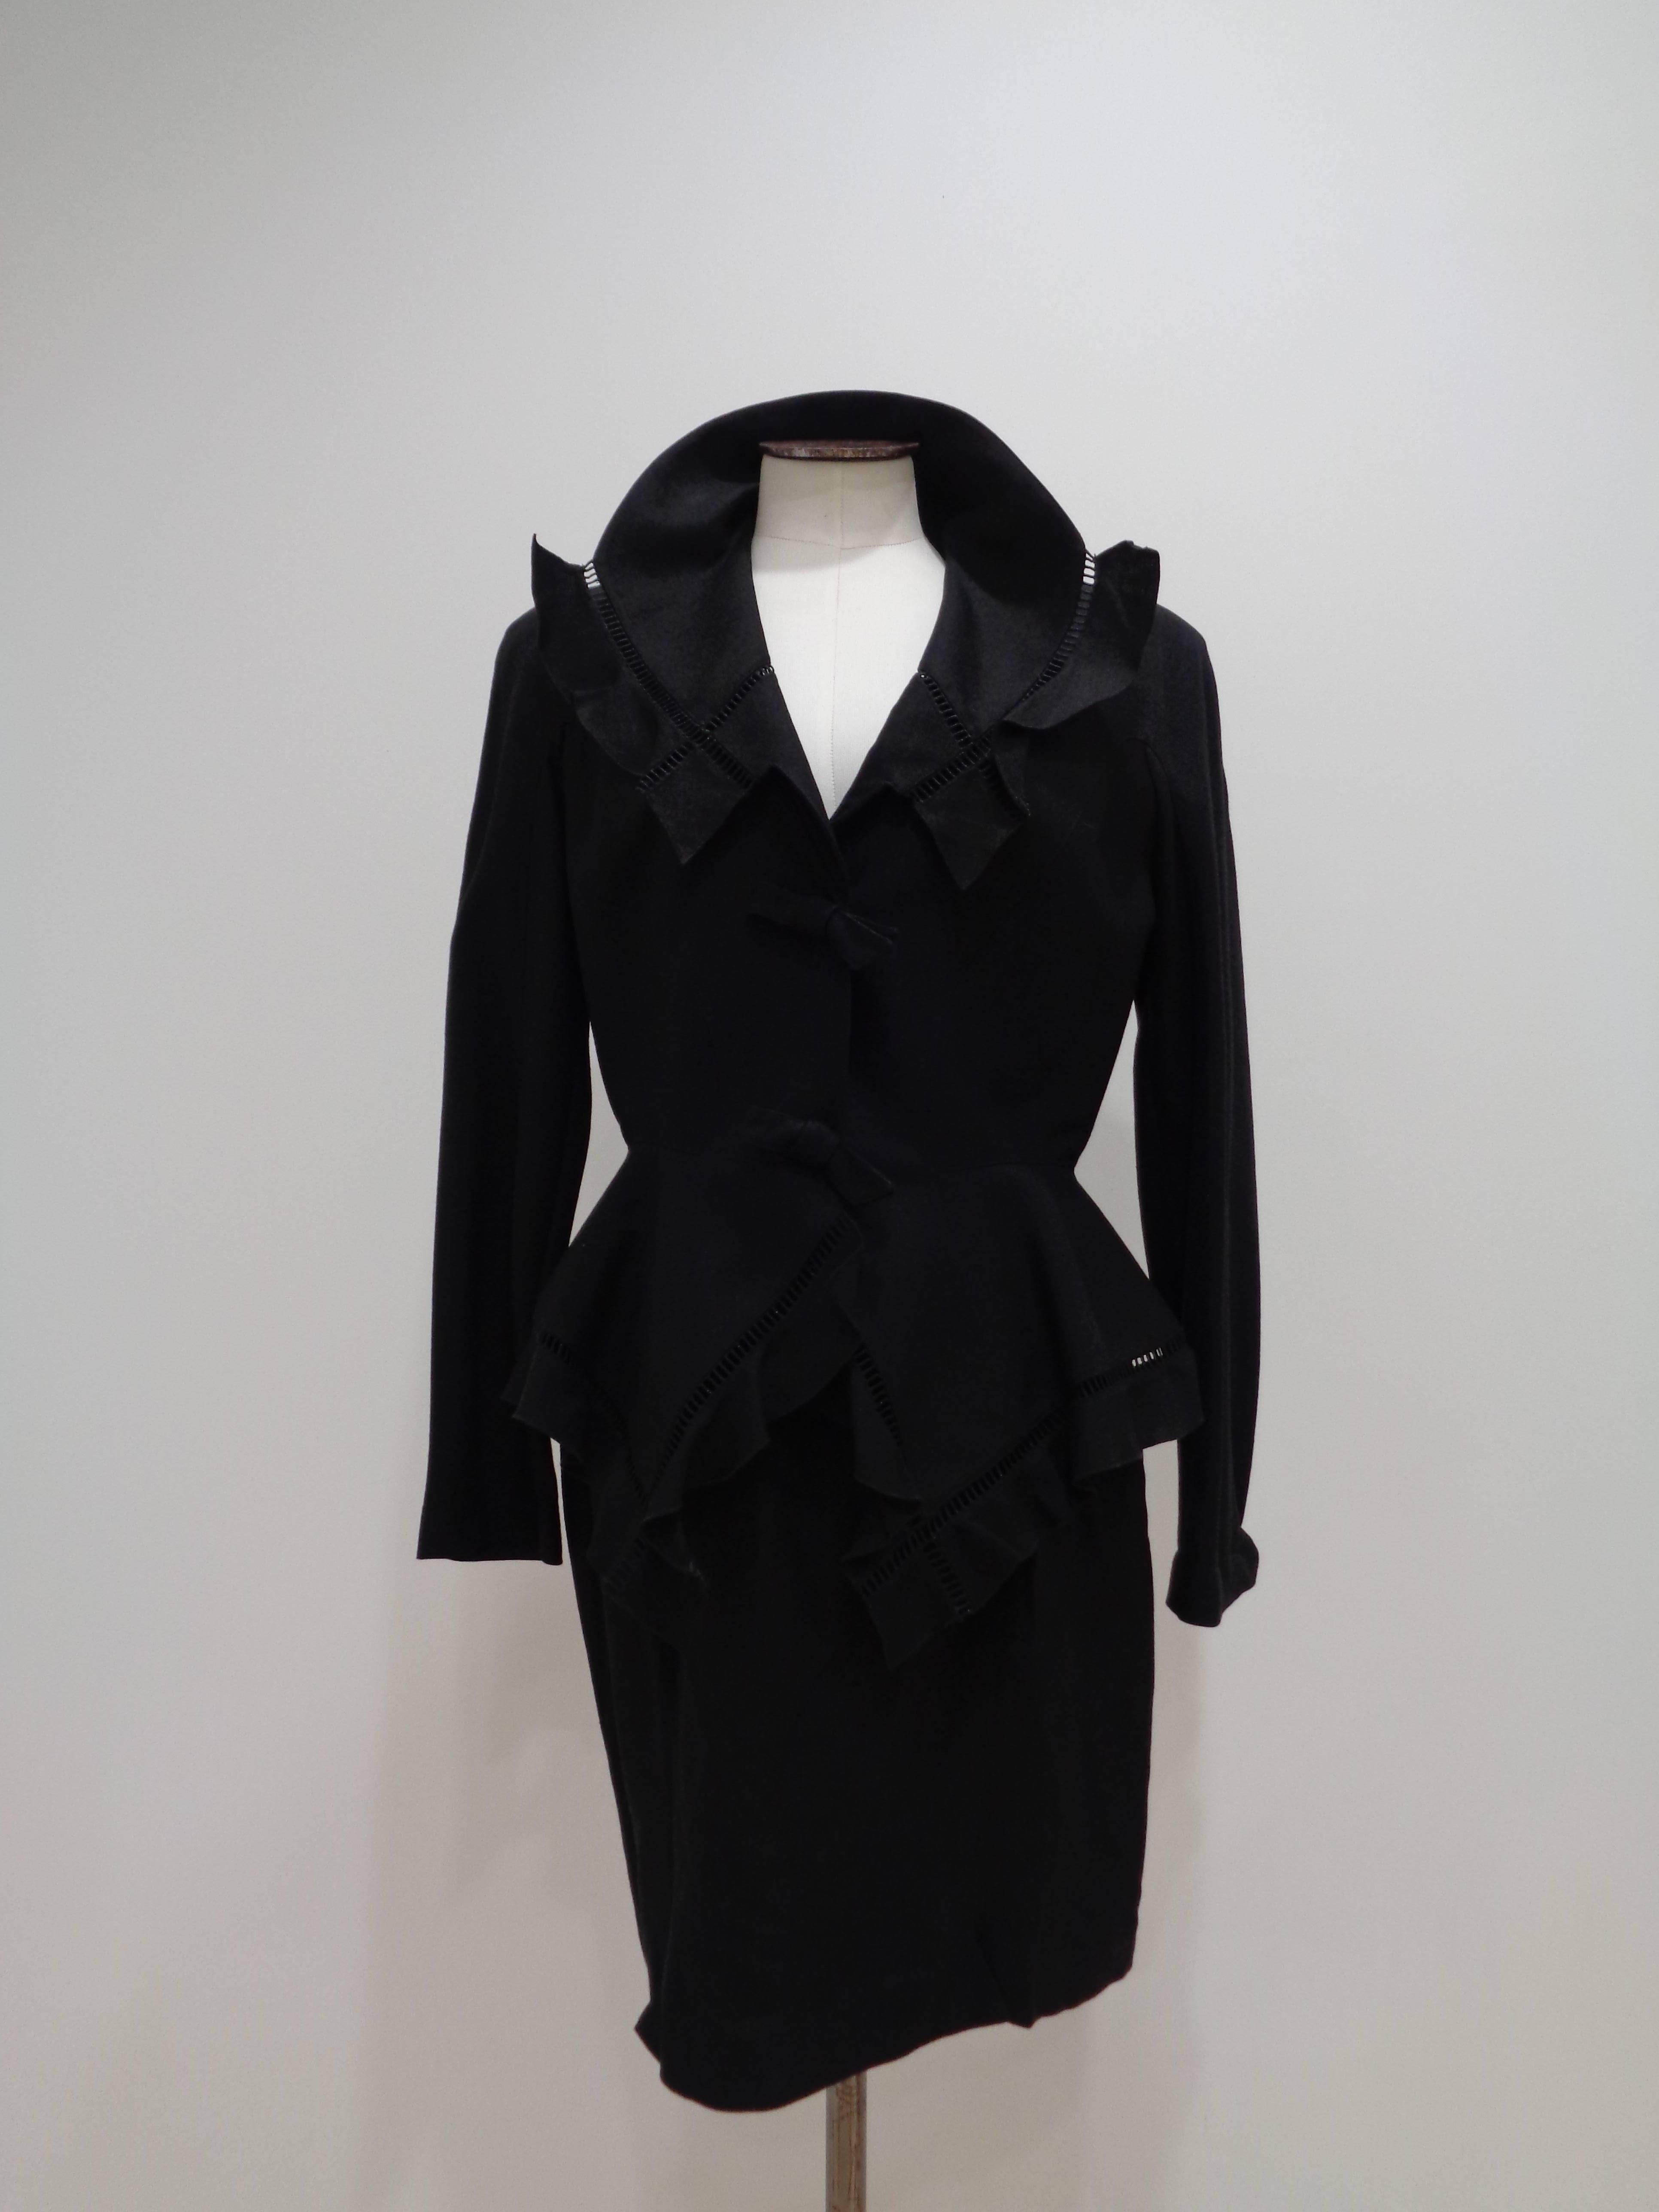 Thierry Mugler Black skirt suit

size 42